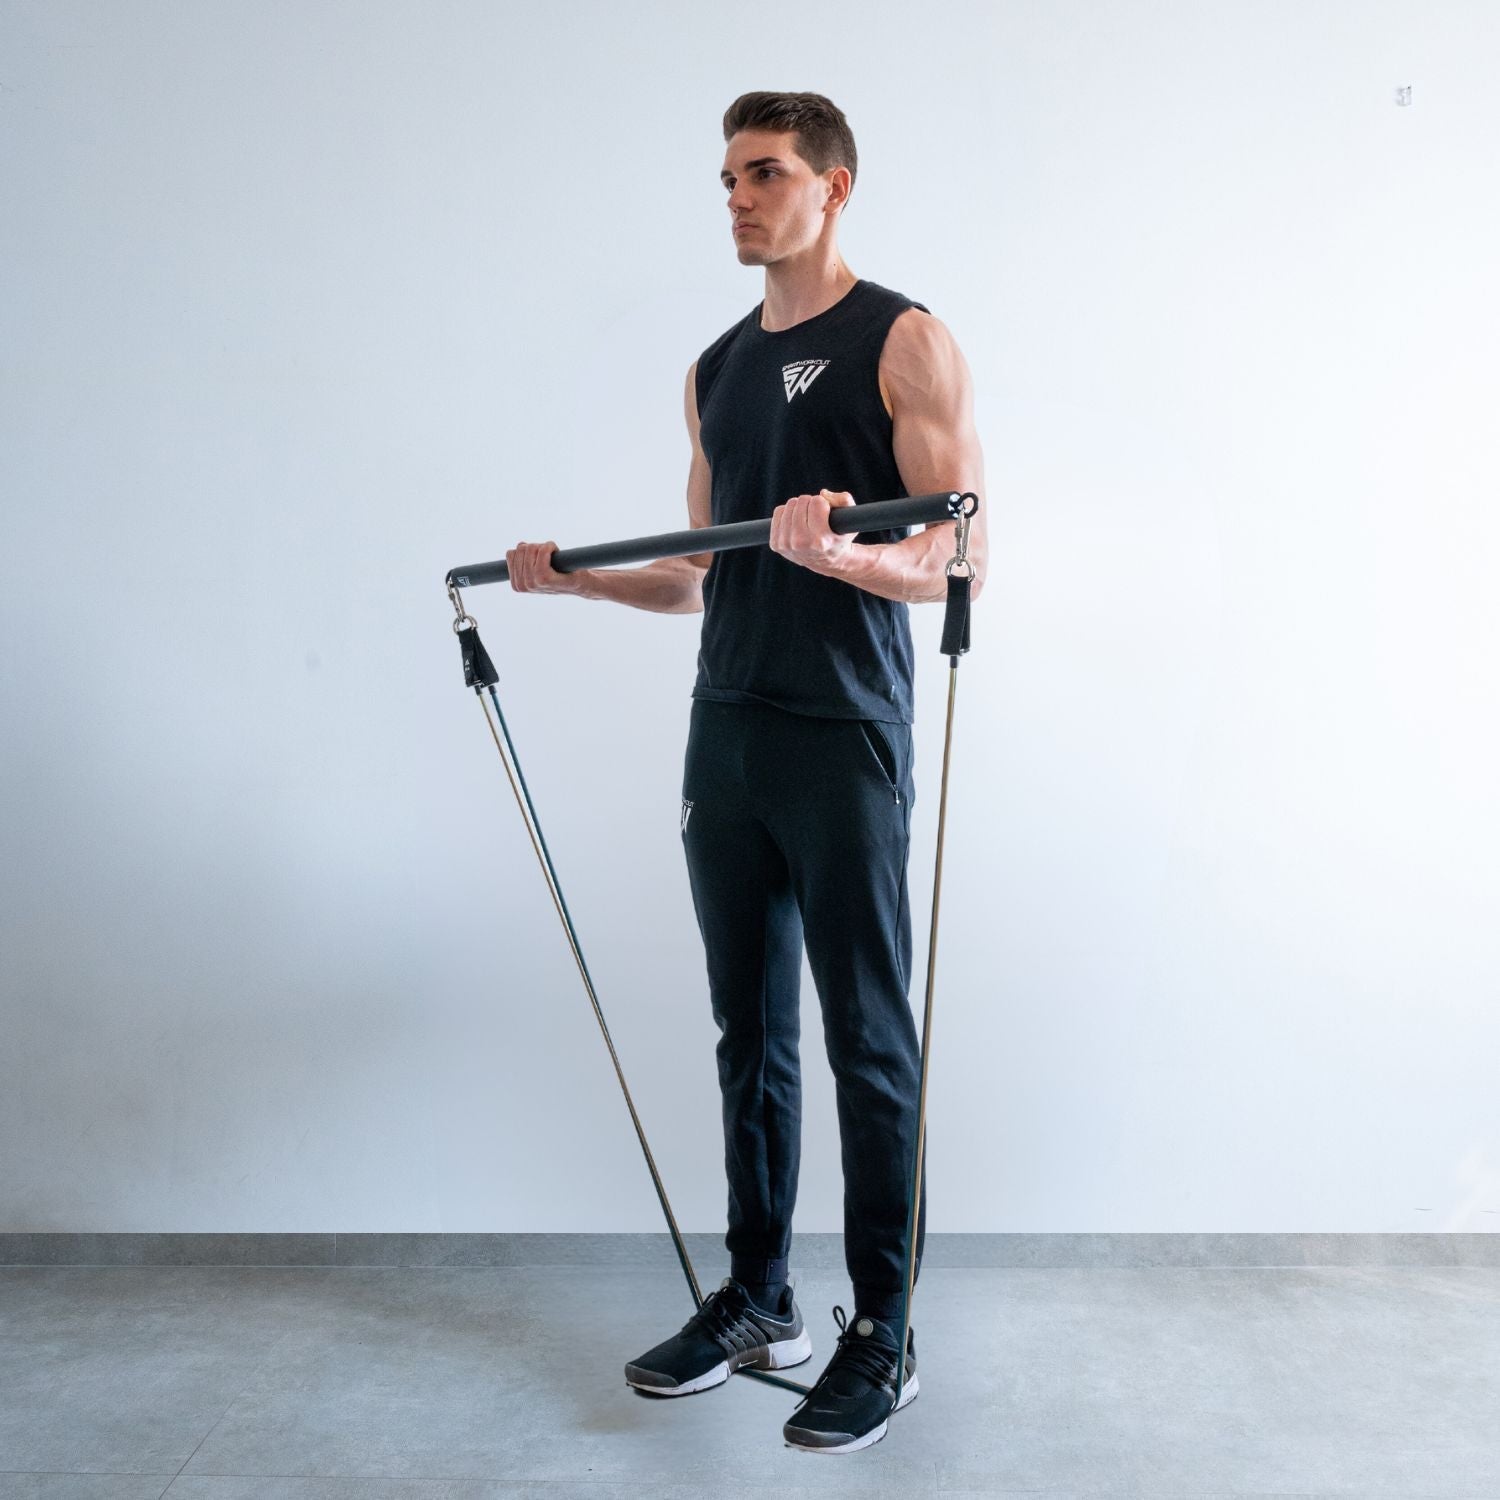 Arm exercises with resistance bands